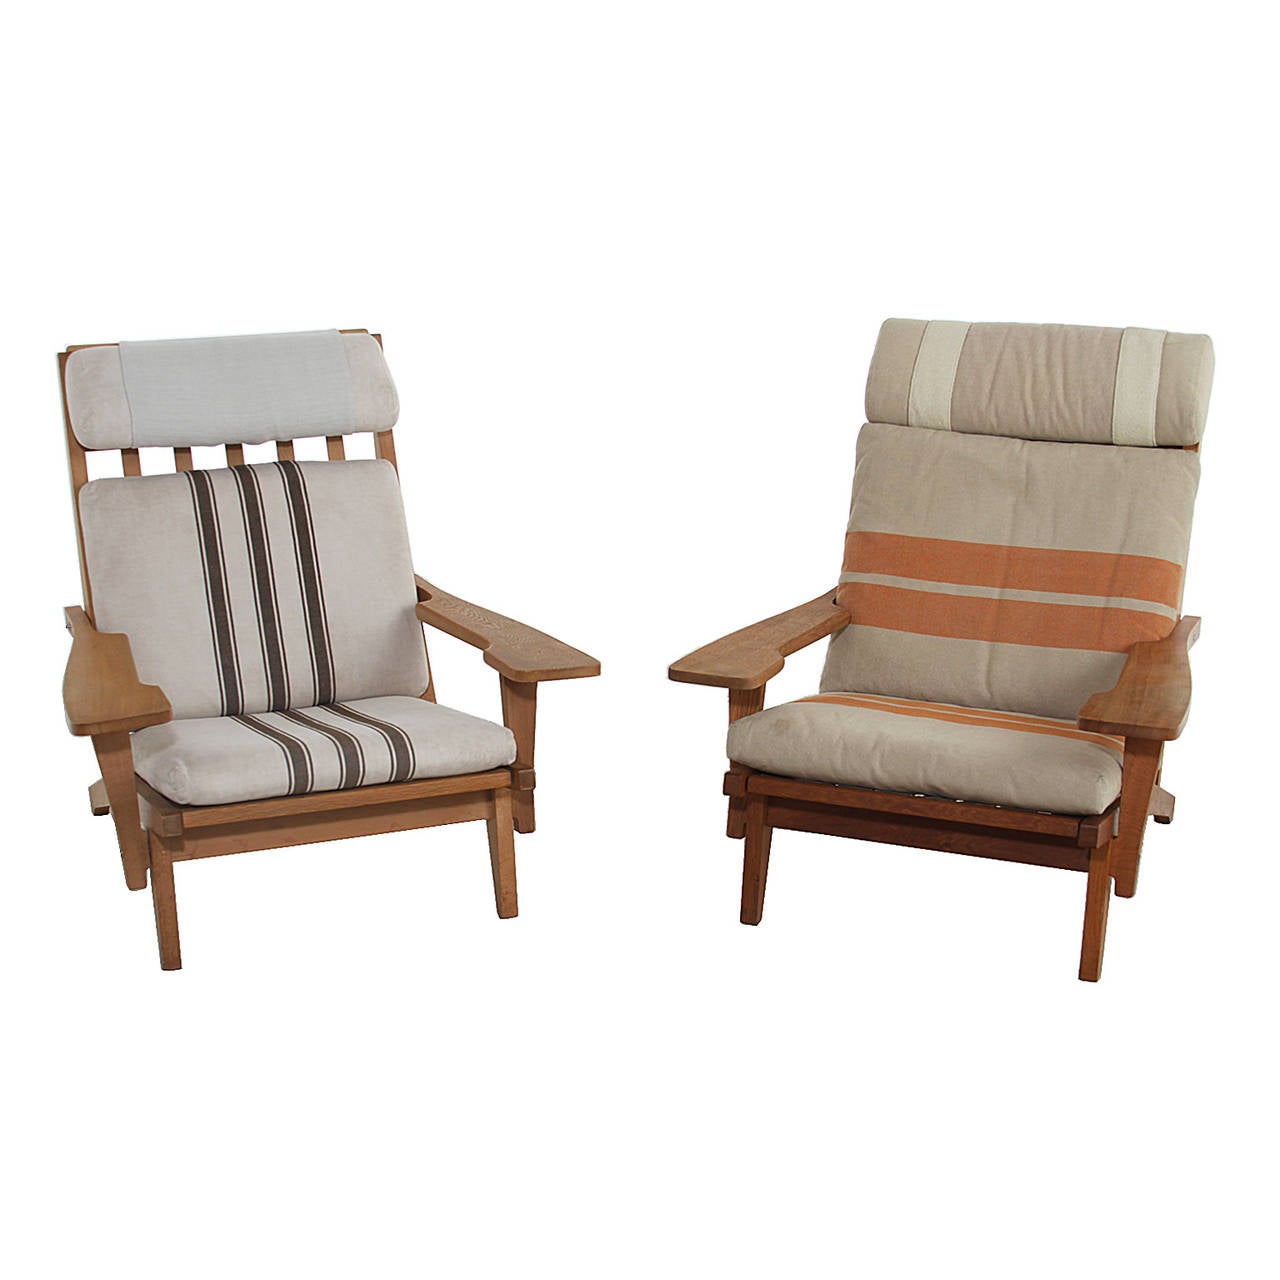 A pair of the more rare GE 375 Hans Wenger paddle arm lounges chairs in oak with original wool upholstery.

Many pieces are stored in our warehouse, so please click on CONTACT DEALER under our logo below to find out if the pieces you are